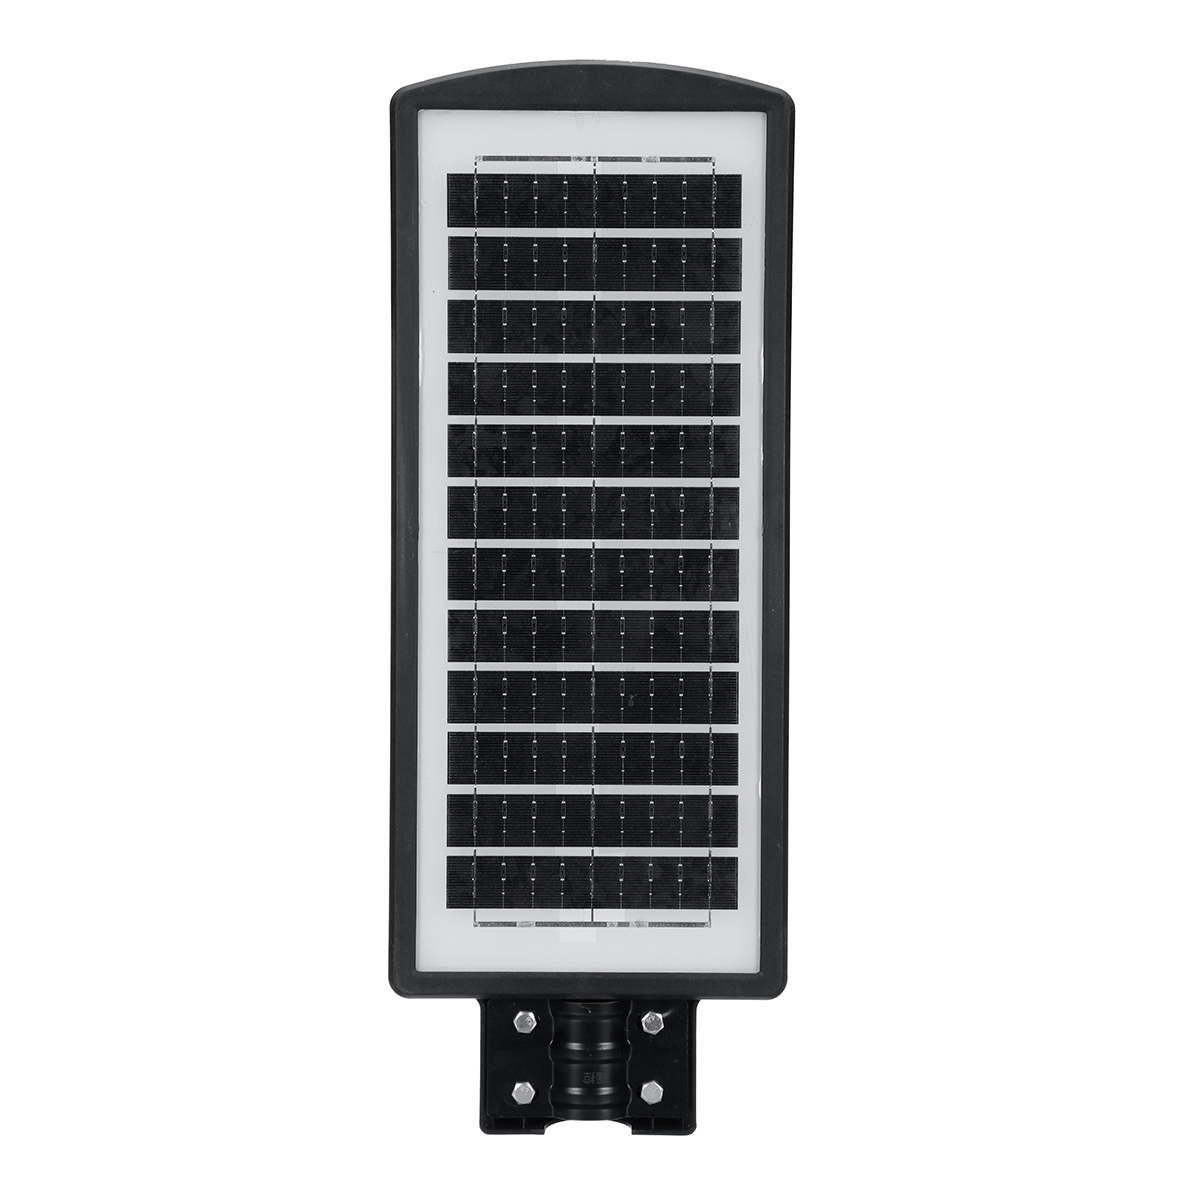 Find 300/450 LED Solar Street Light PIR Motion Sensor Security Wall Lamp Waterproof Outdoor Lighting for Sale on Gipsybee.com with cryptocurrencies